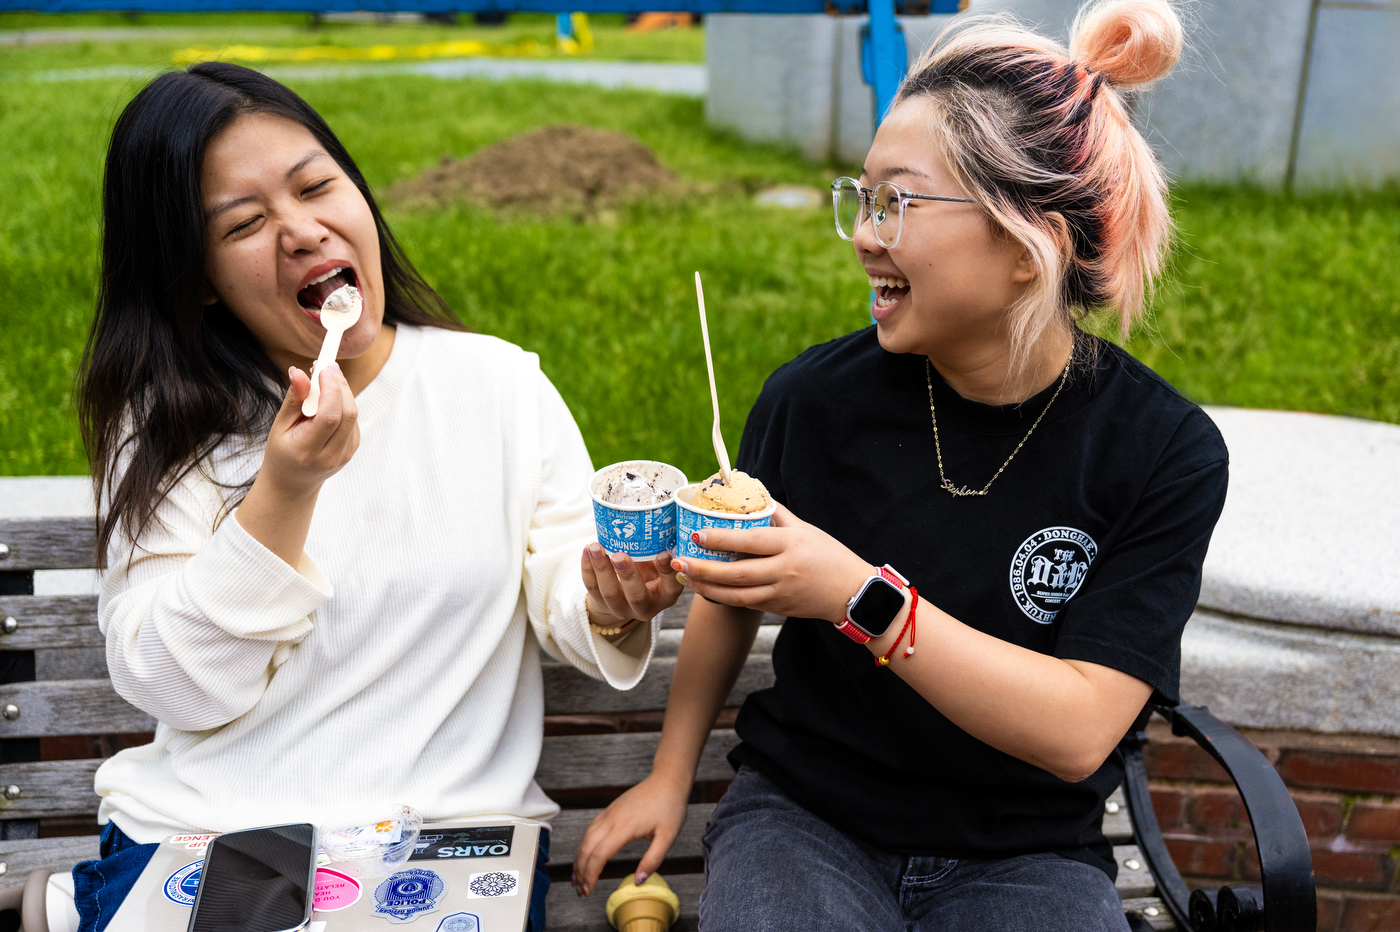 Two people laugh together while enjoying ice cream outside on a sunny day.